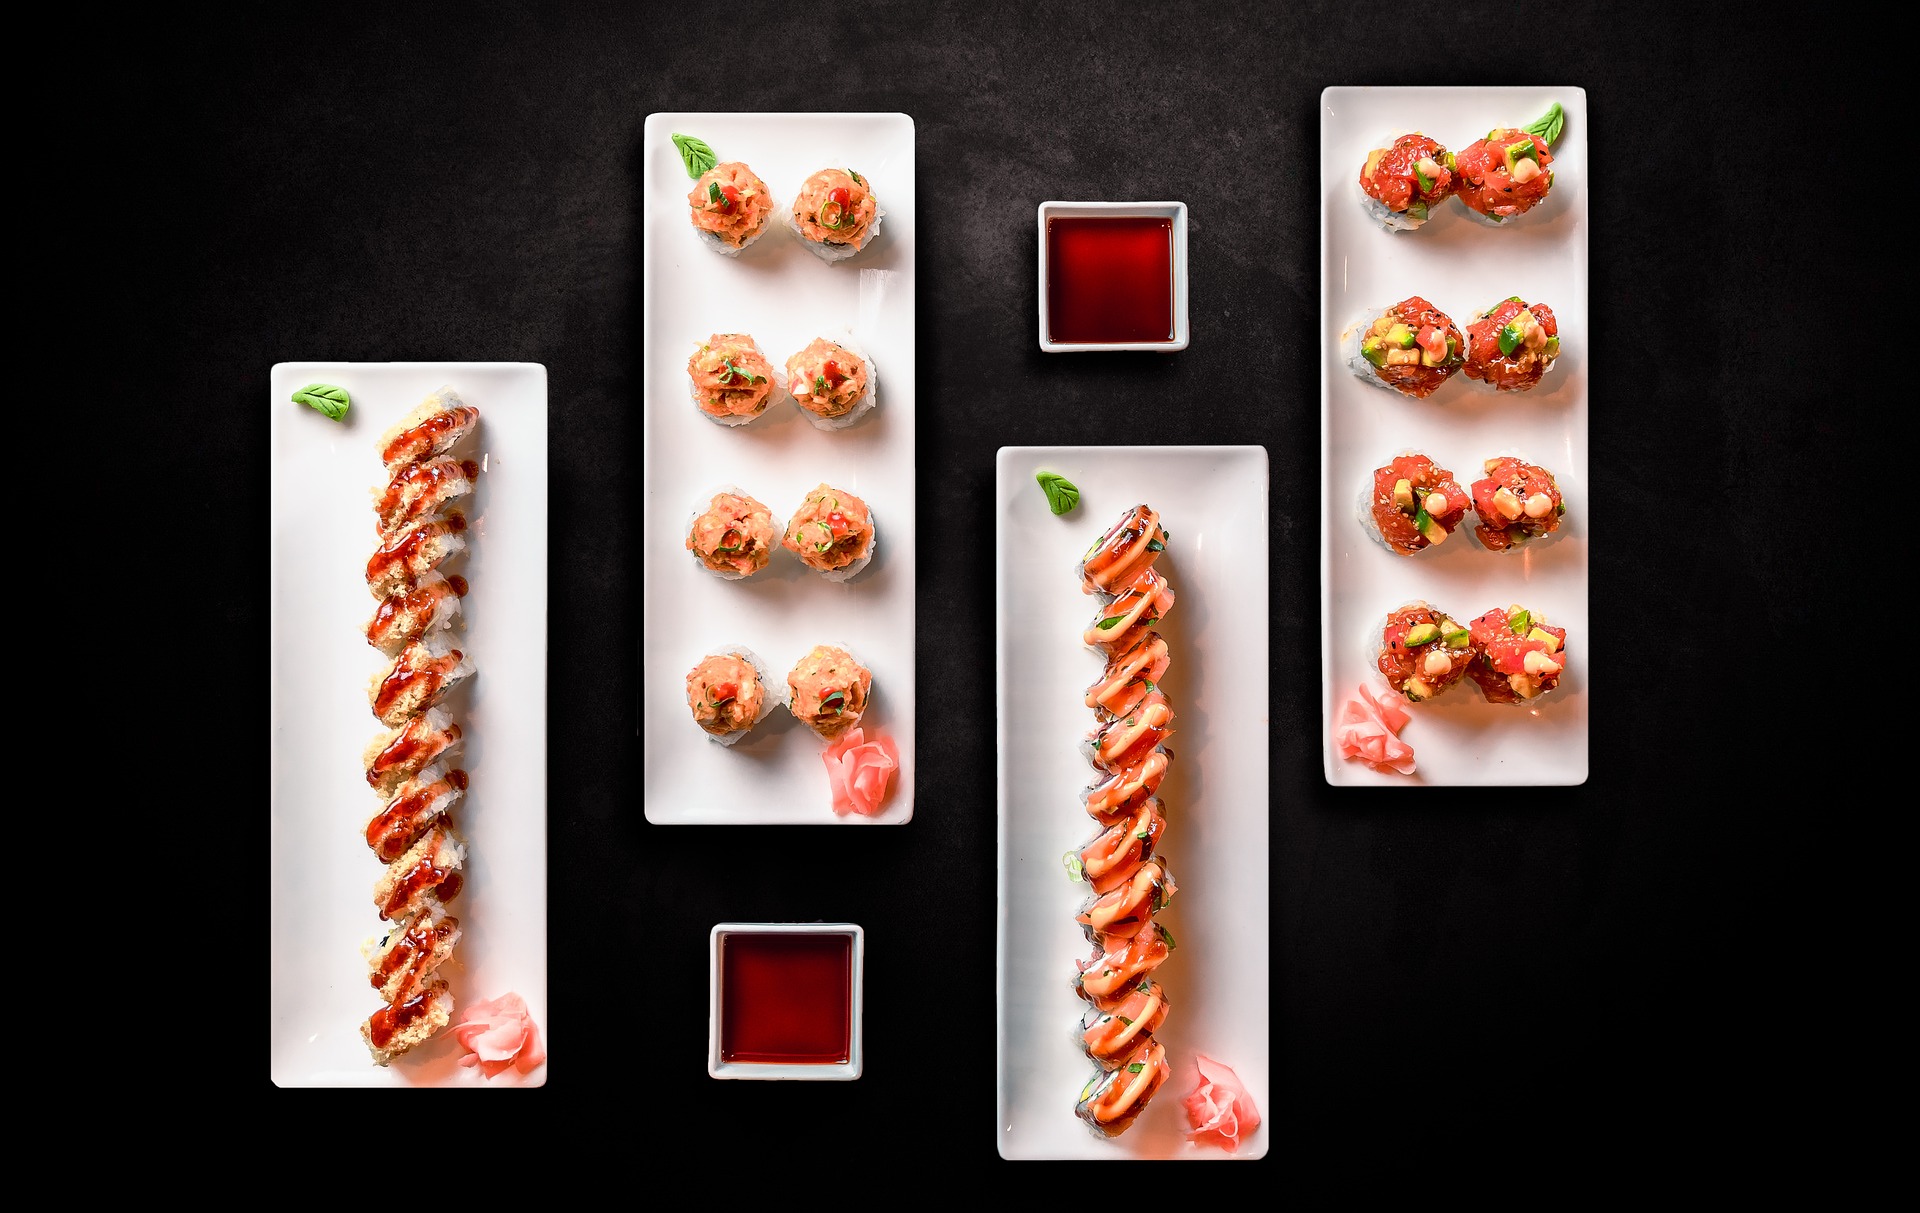 Decoratively-plated sushi on a black tabletop